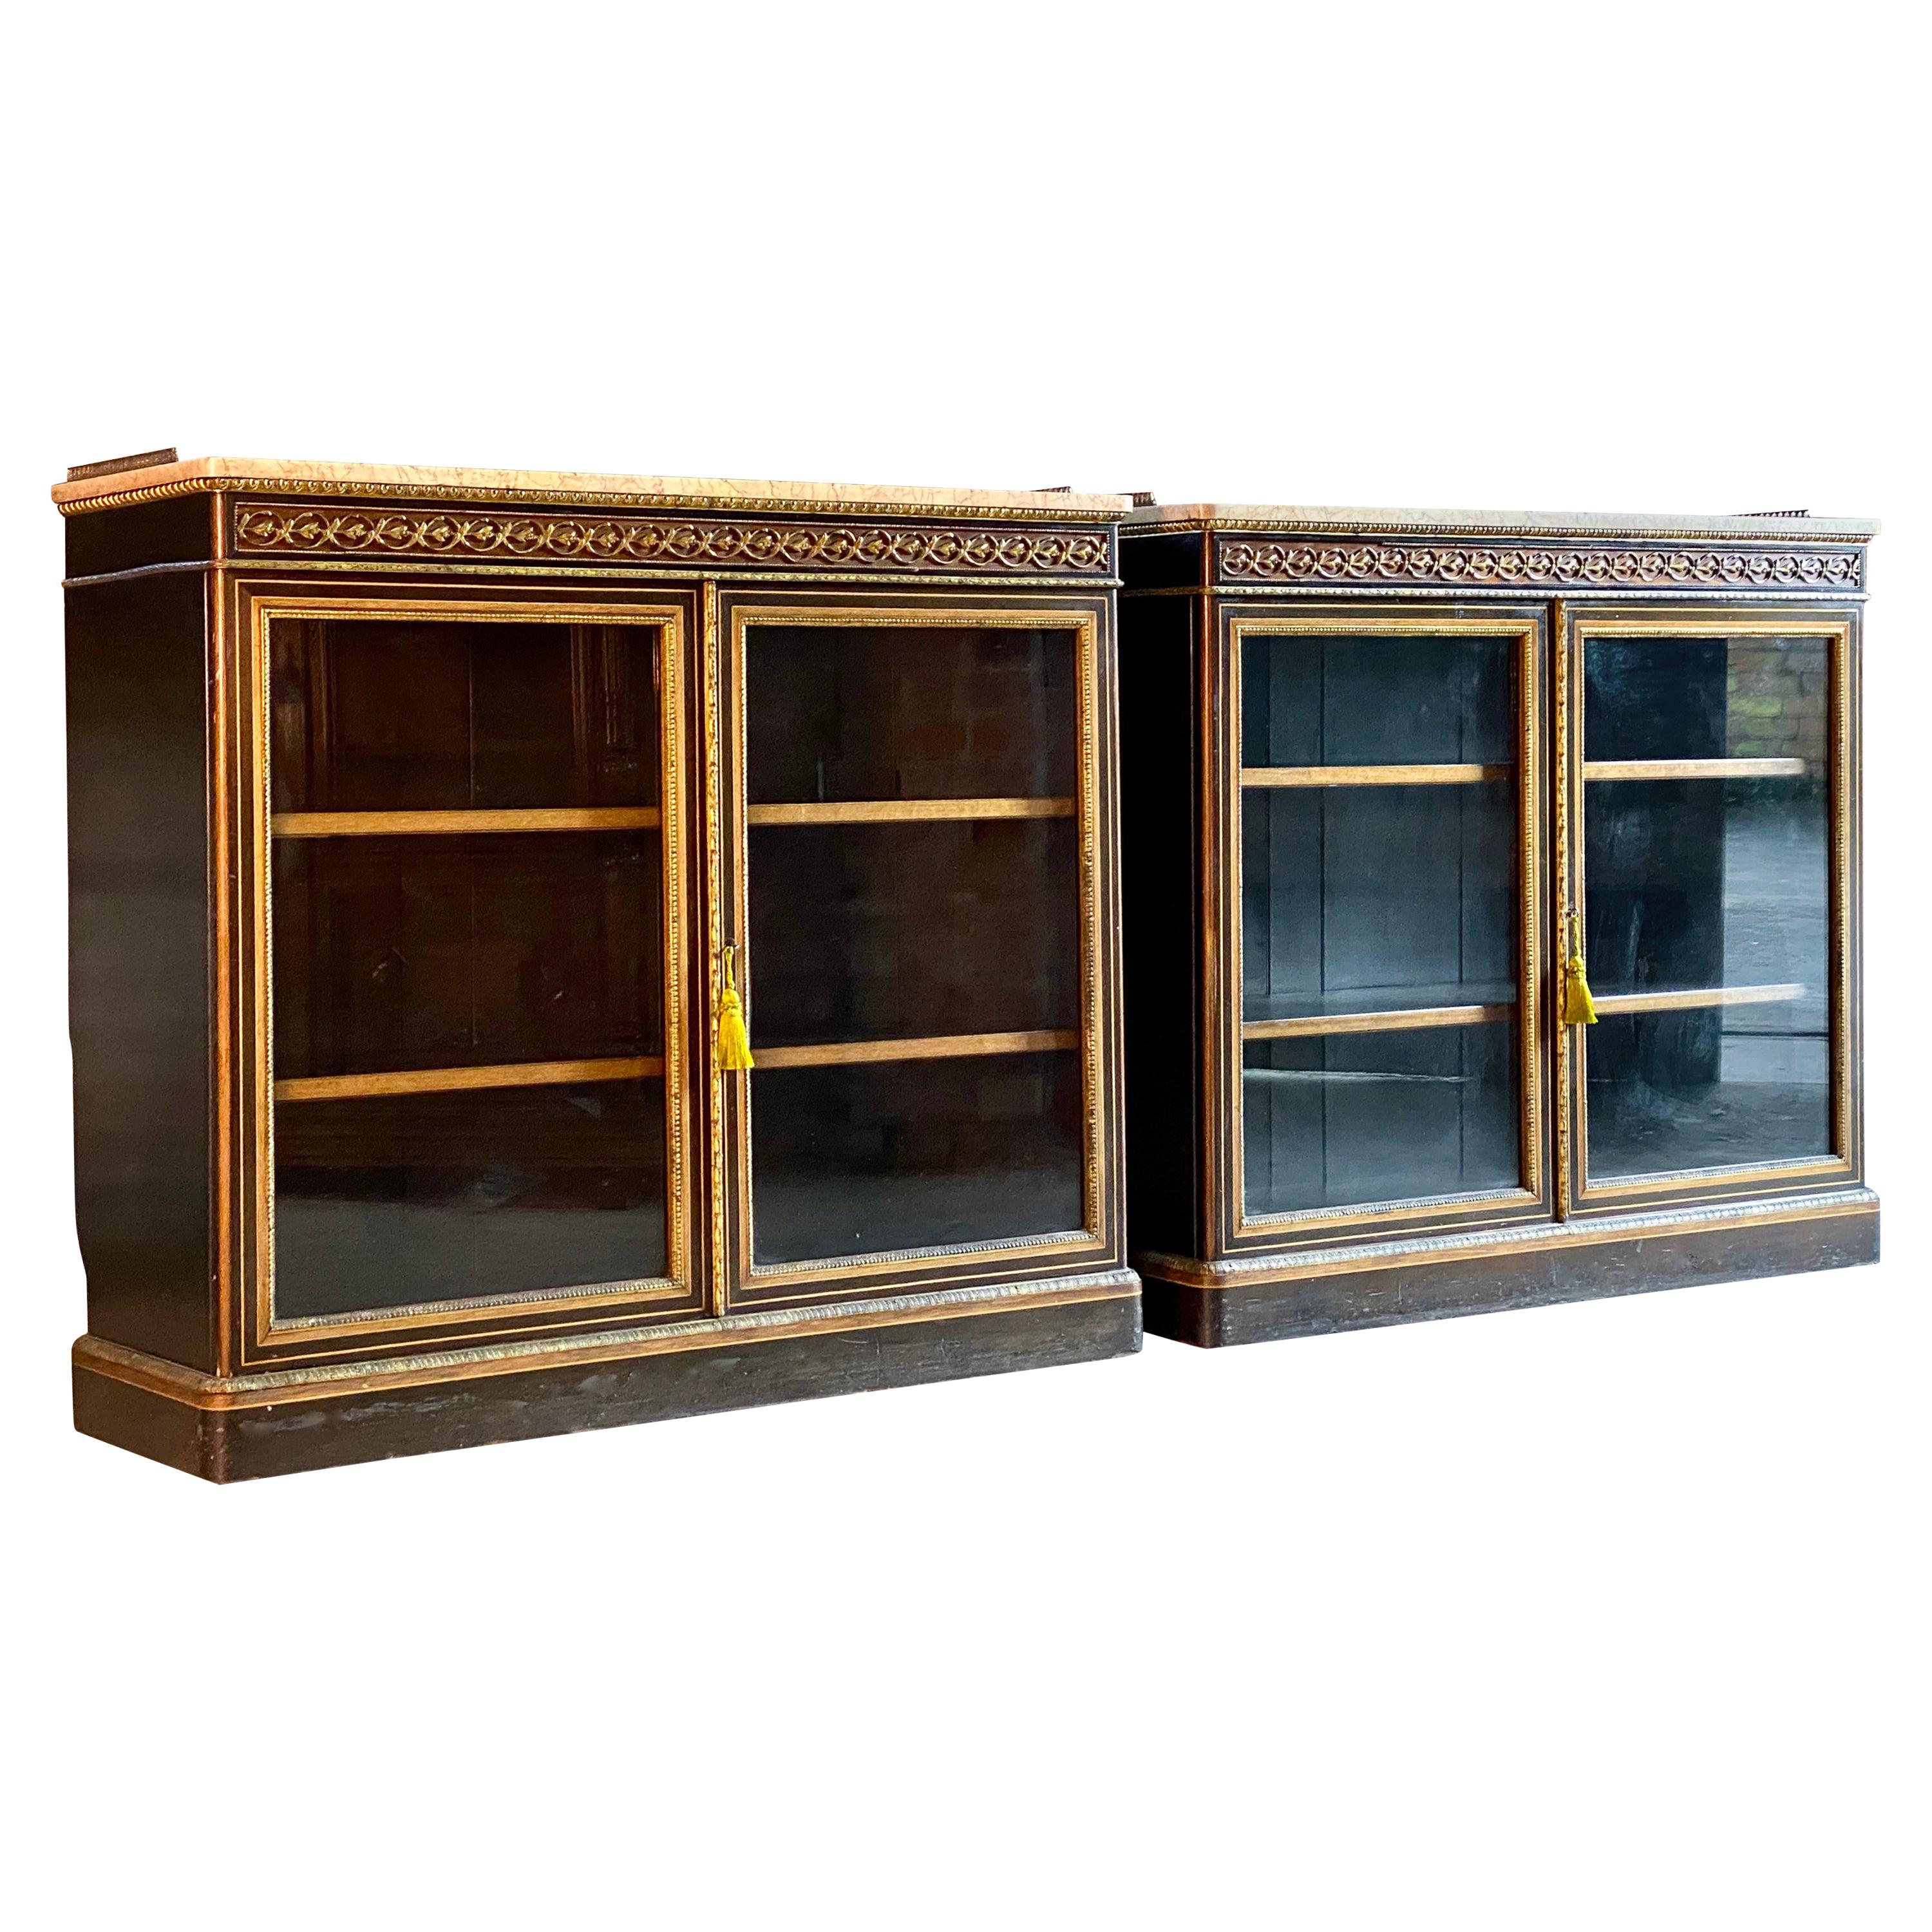 Antique Bookcases Lamb of Manchester Walnut Pair of Cabinets, circa 1850